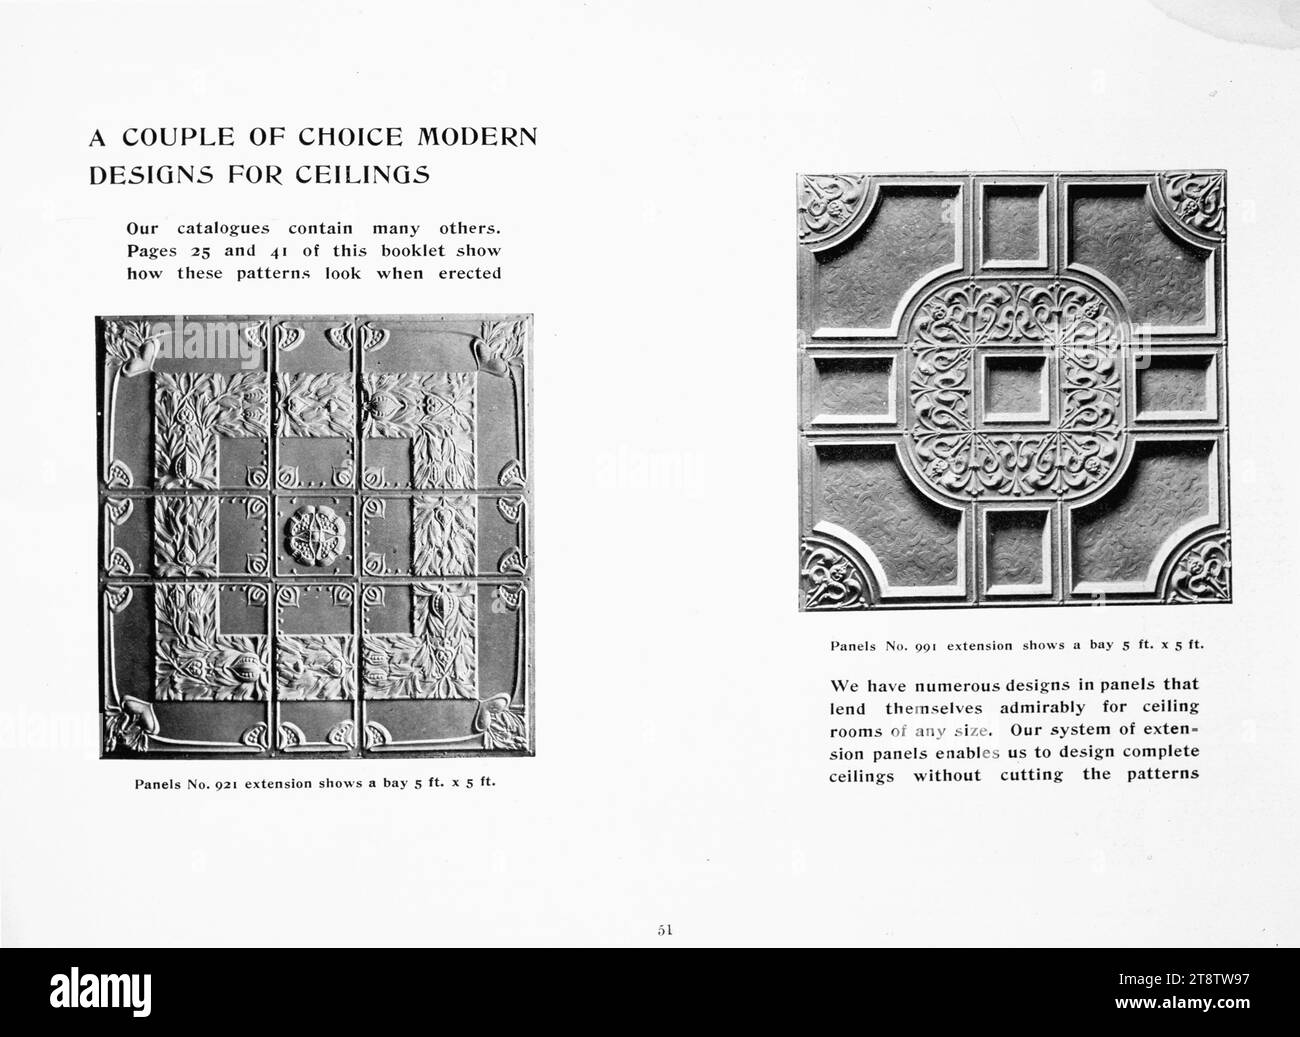 Briscoe & Co. Ltd: A couple of choice modern designs for ceilings. ca 1907, Shows two panels of Wunderlich art metal ceilings Stock Photo